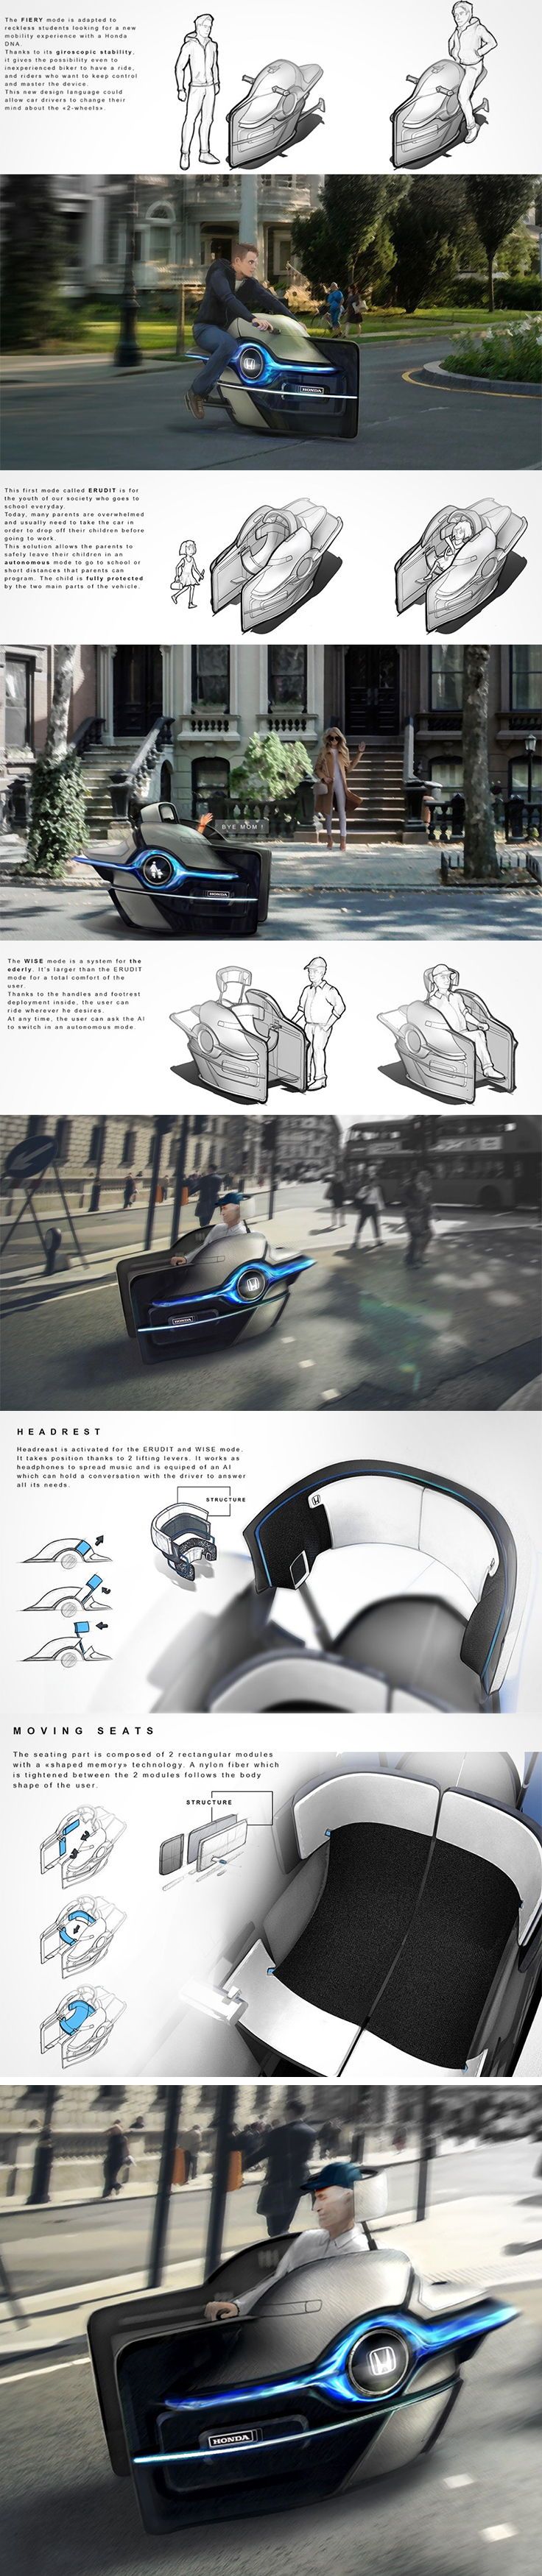 Not only limited to grandparents, the Honda MODULAR concept explores how urban d...